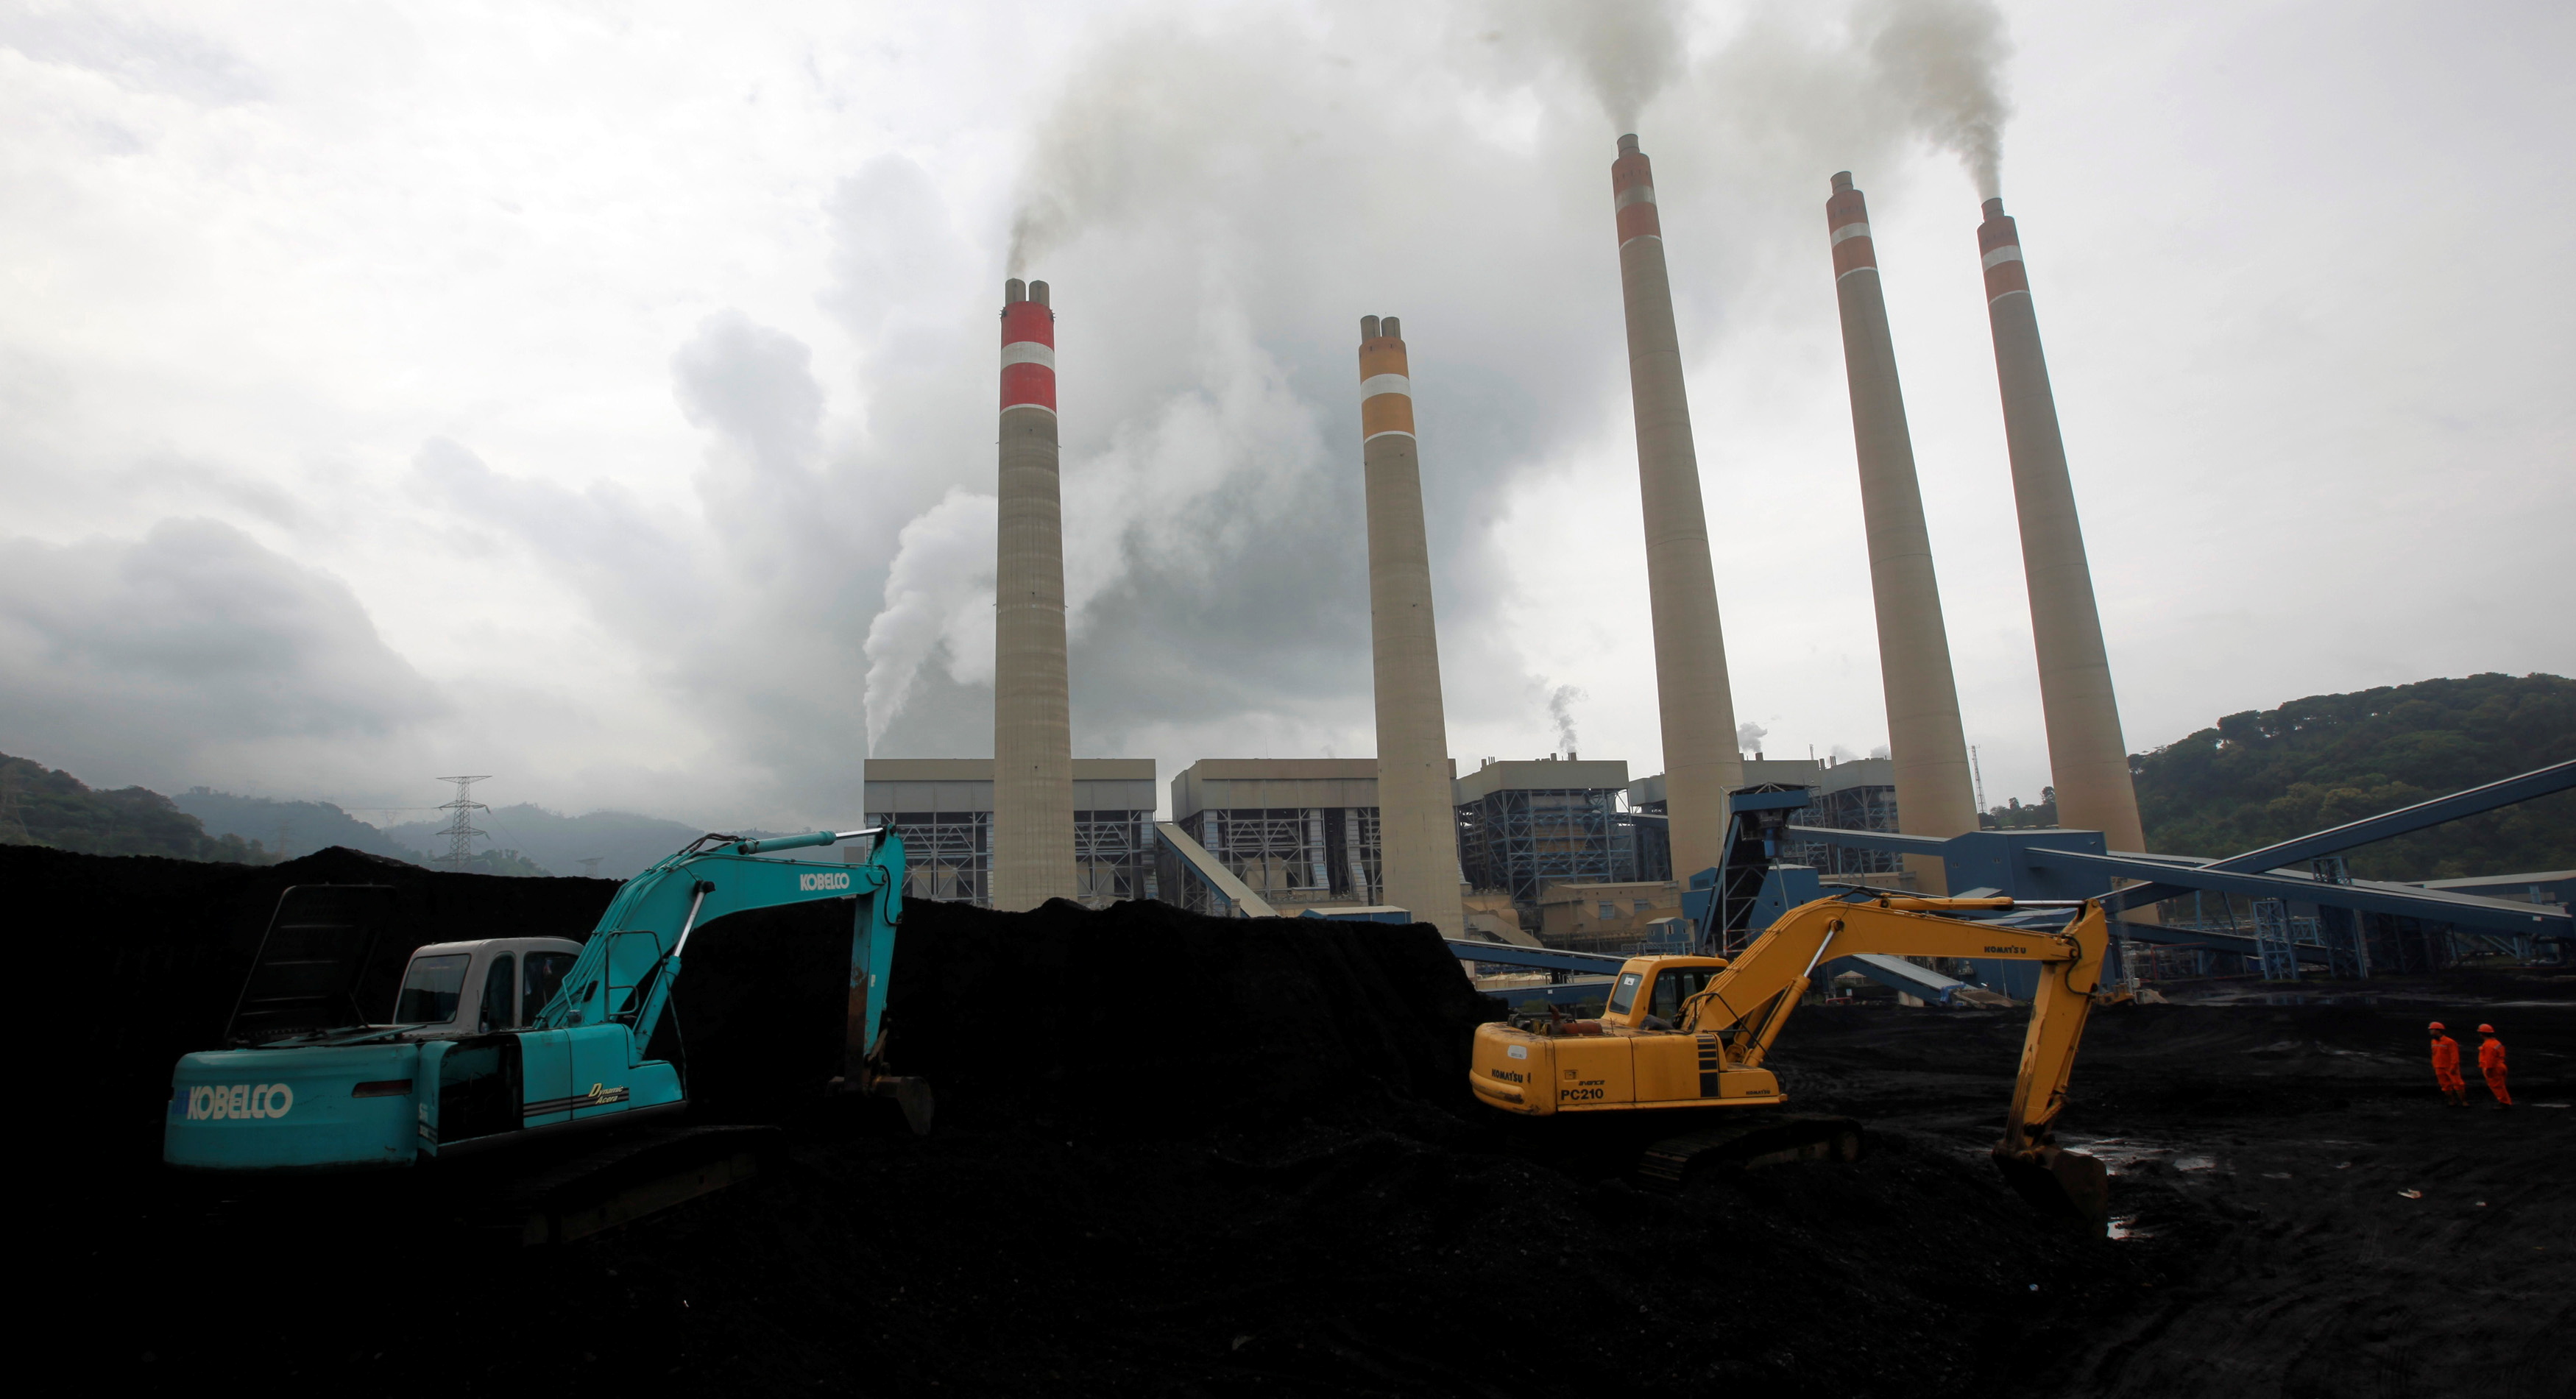 Excavators pile coal in a storage area in an Indonesian Power Plant in Suralaya, in Banten province January 20, 2010.